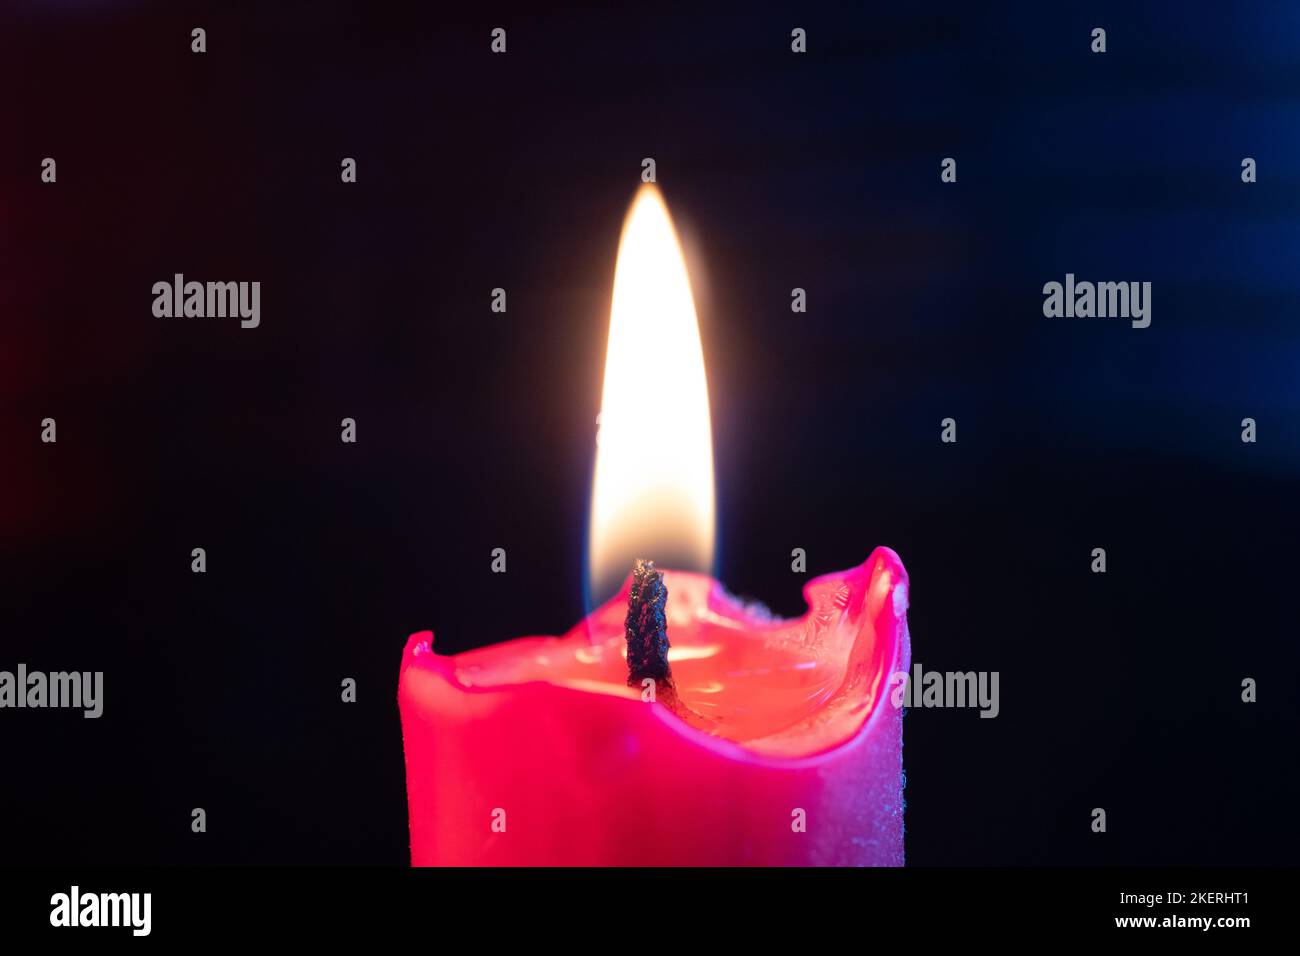 Candle flame flickers in the wind against a black background Stock Photo